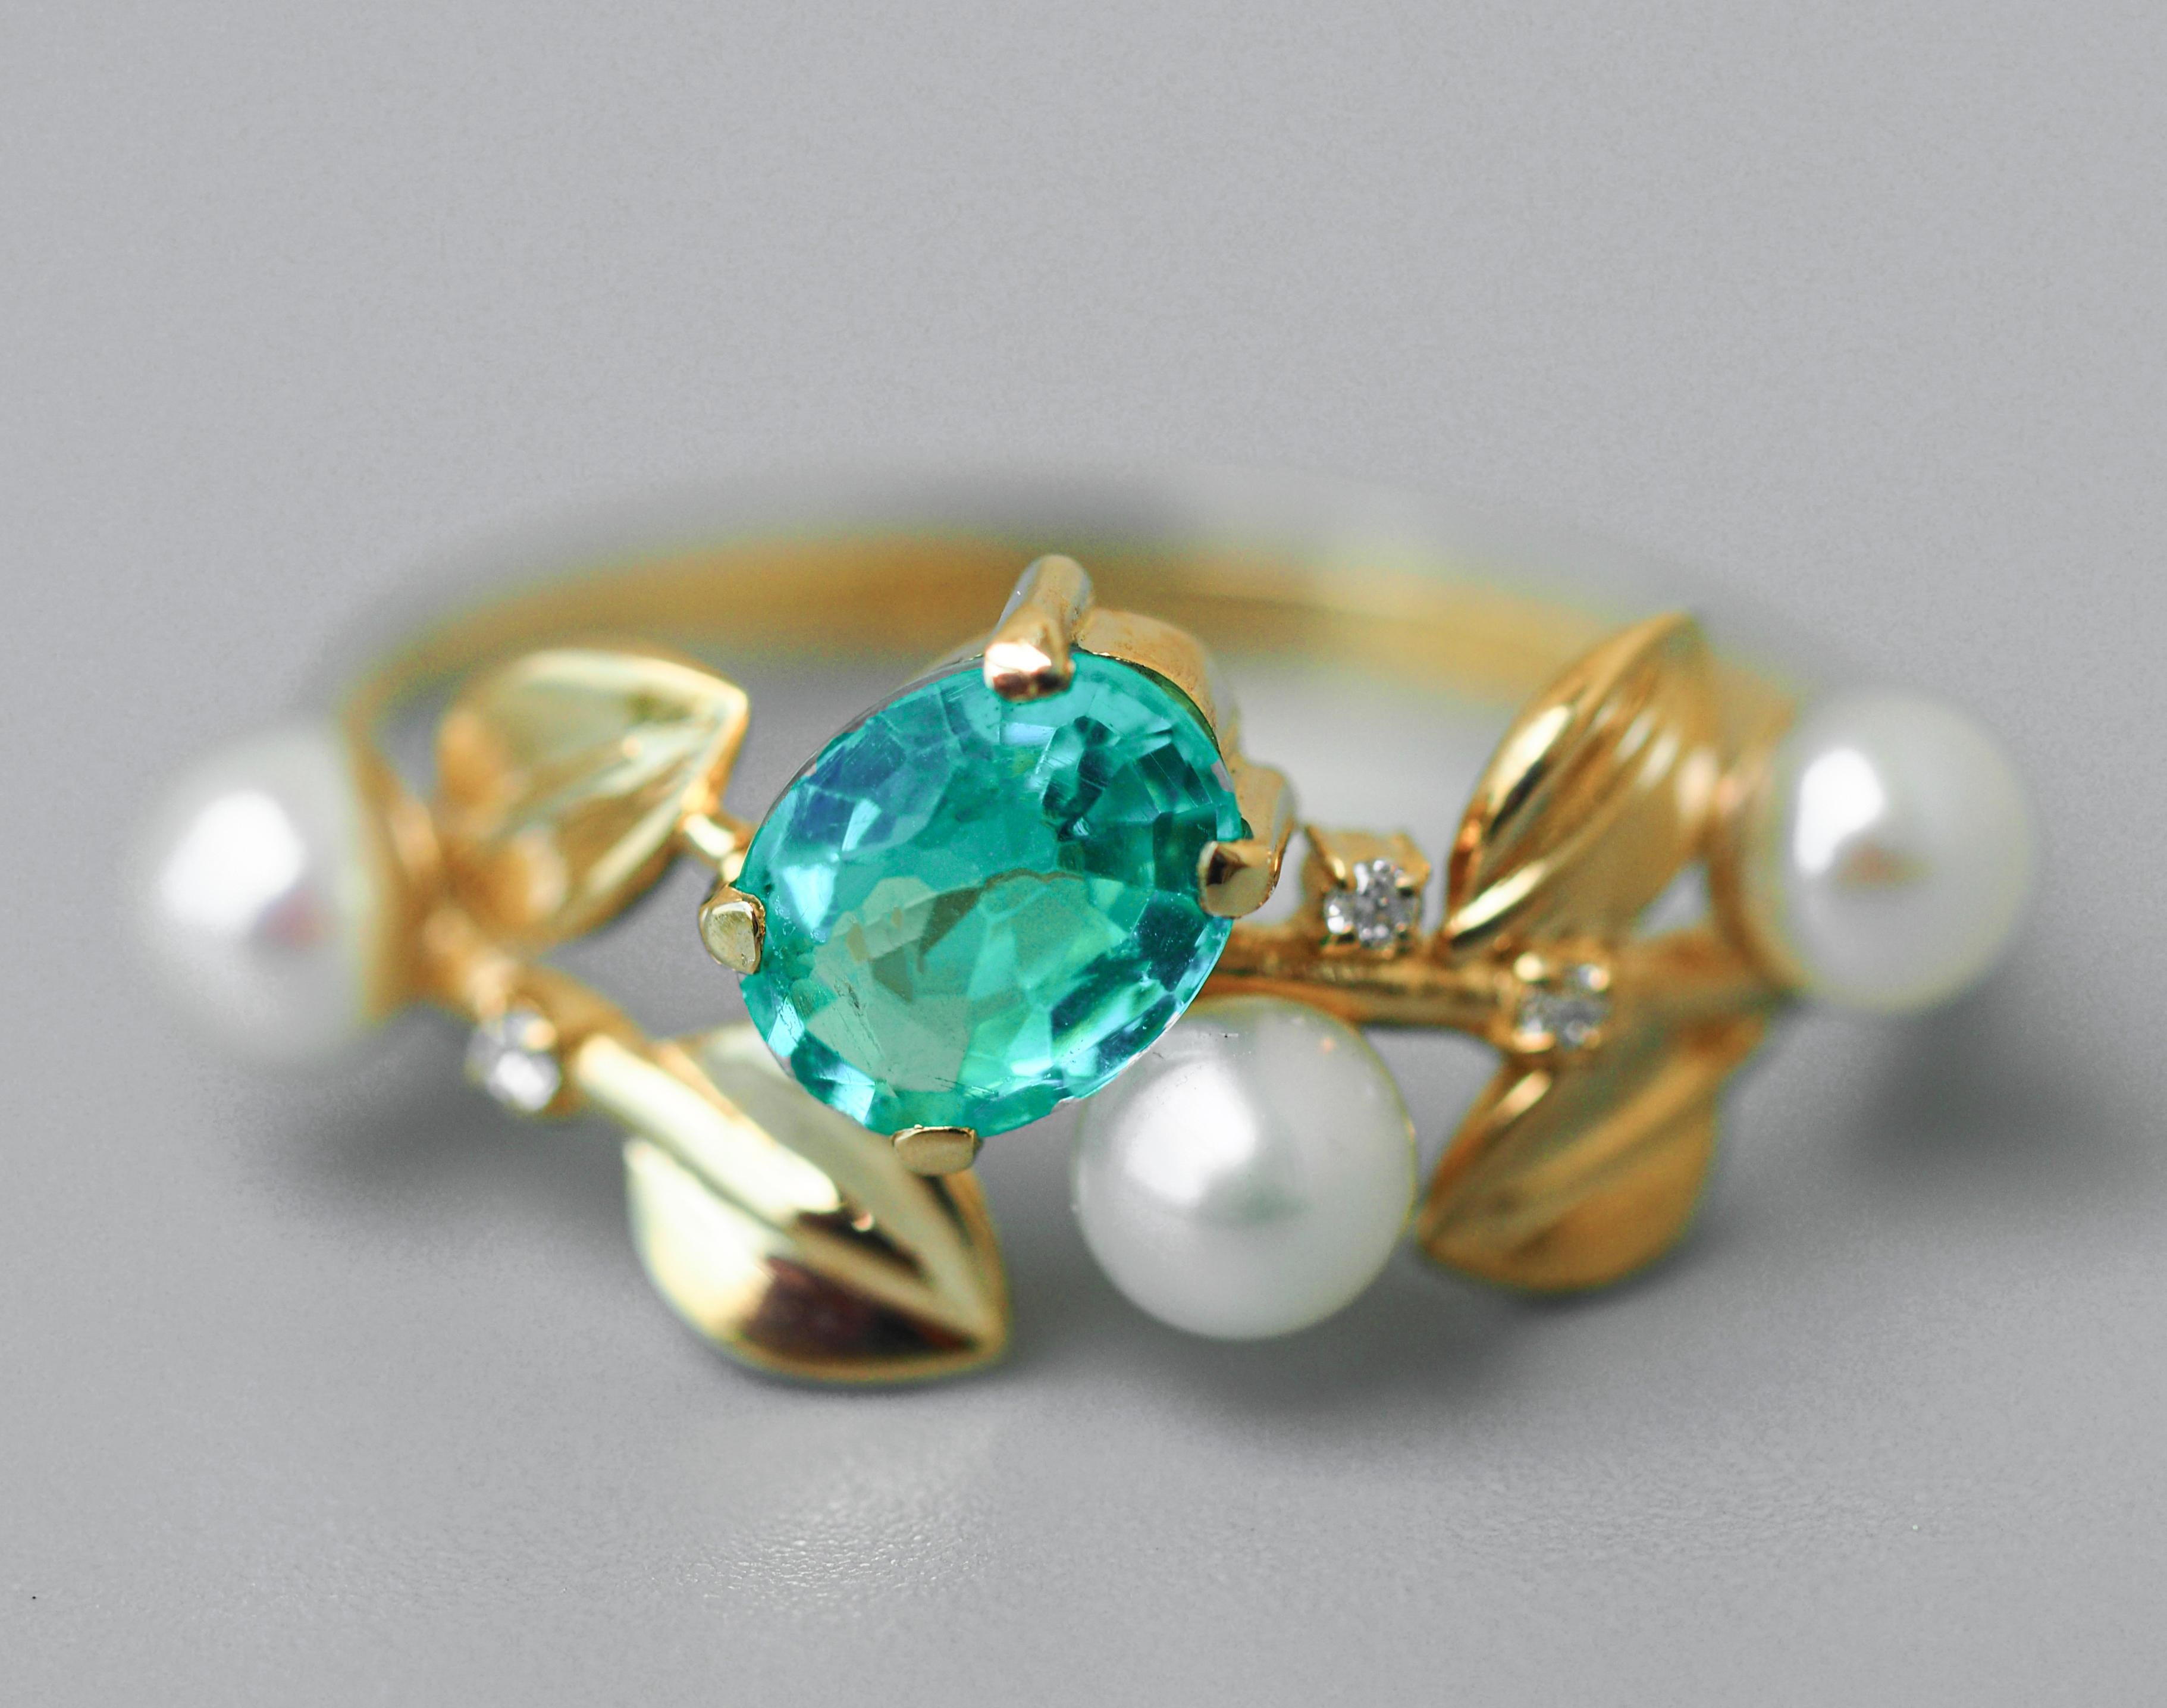 14k gold floral ring with oval neon paraiba apatite, diamonds and pearls. 
Plant flower engagement ring. Neon paraiba blue gemstone ring.

Metal: 14k gold
Weight: 1.8 g. depends from size.

Central stone: apatite
Cut: Oval
Weight: aprx 0.8